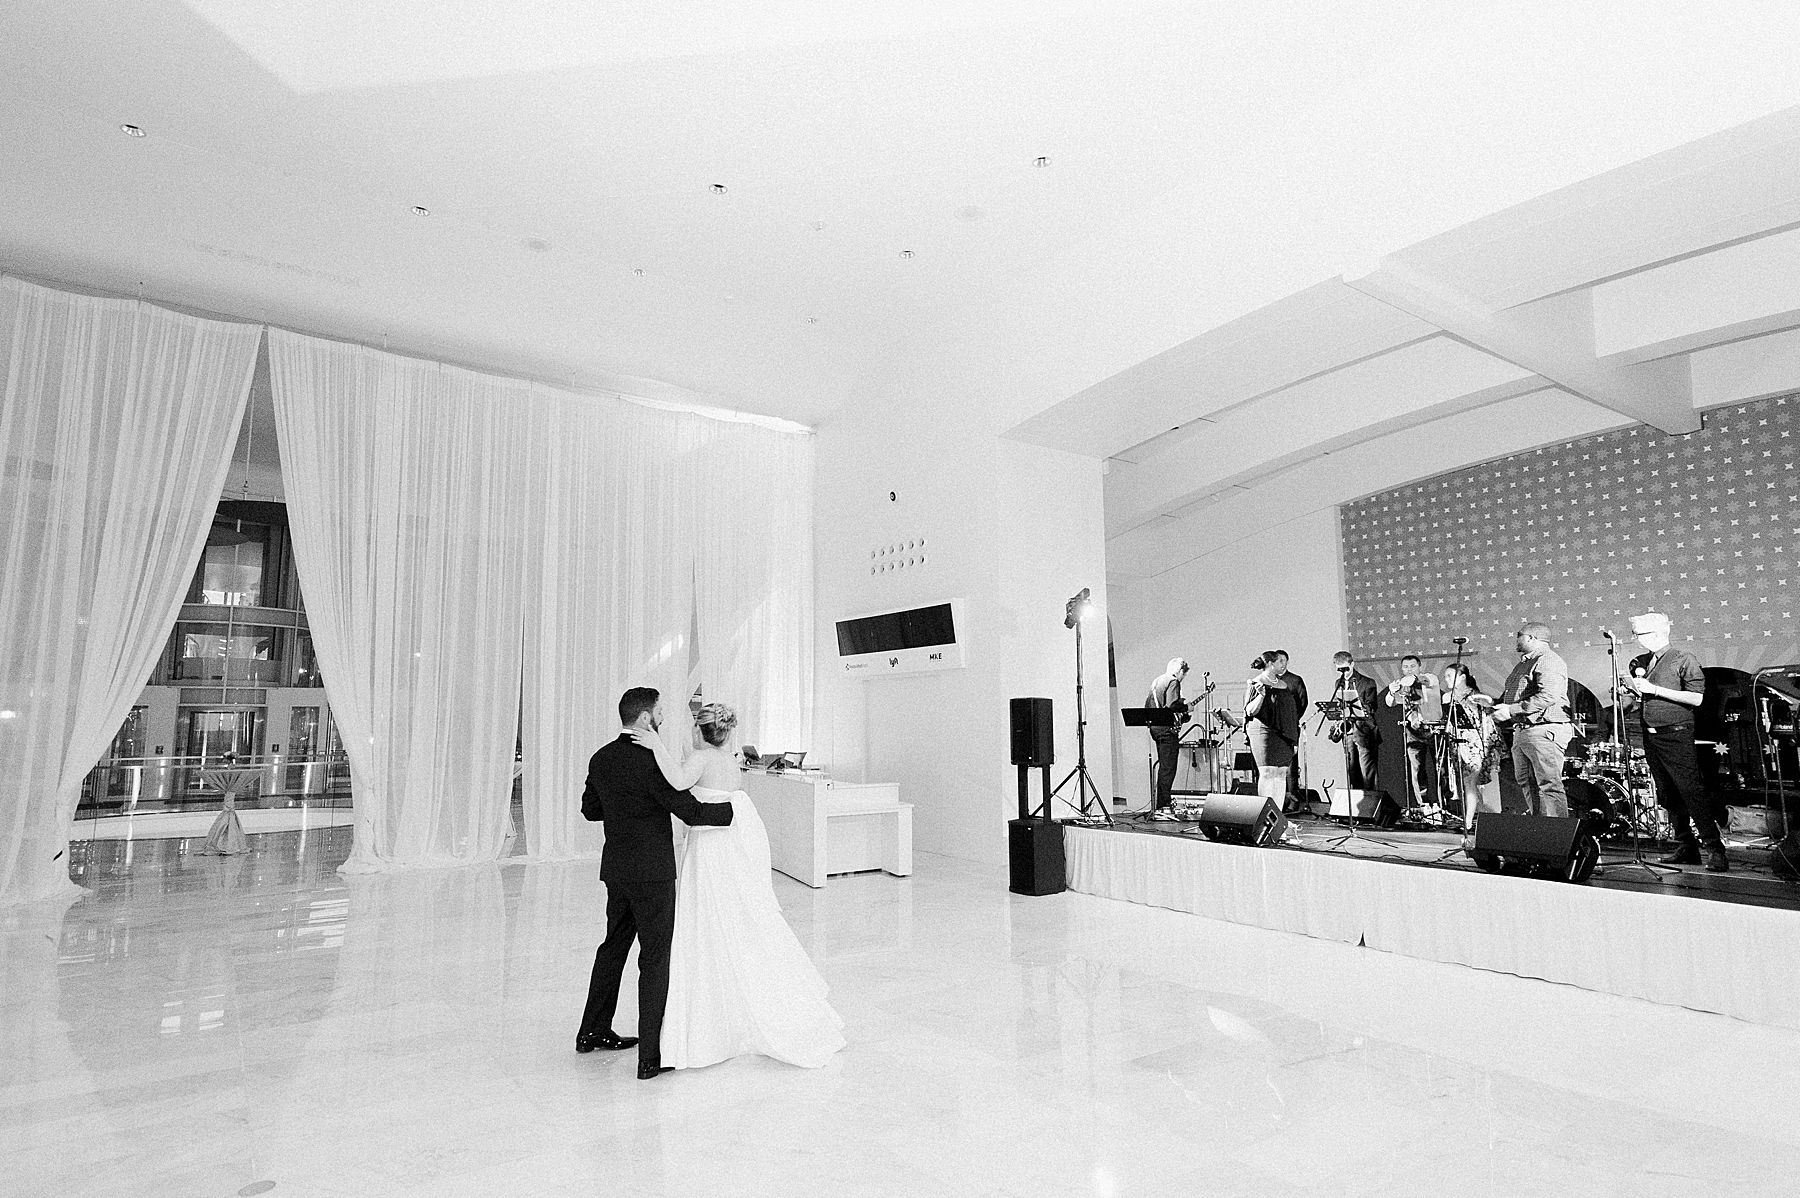 romantic wedding first dance at milwaukee art museum modern architectural gem on lake michigan in downtown